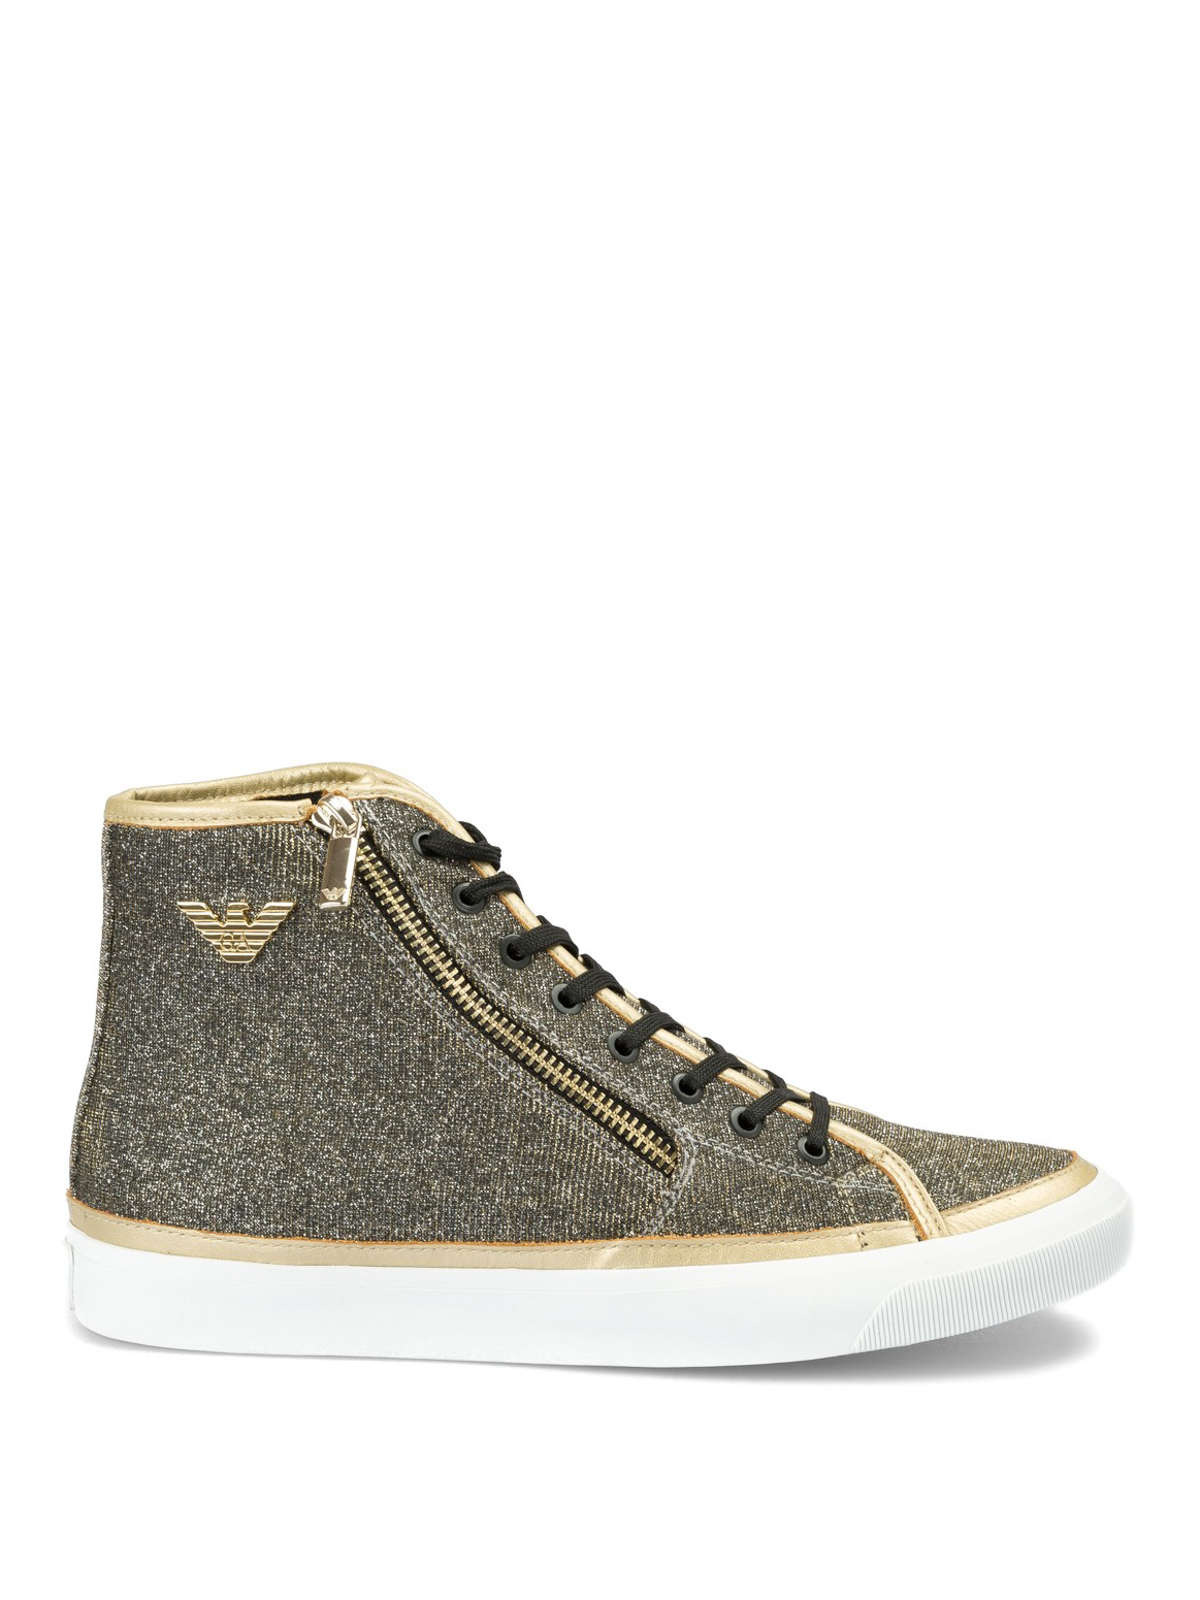 Trainers Emporio Armani - Glittered fabric high top sneakers -  X3Z017XL487K002